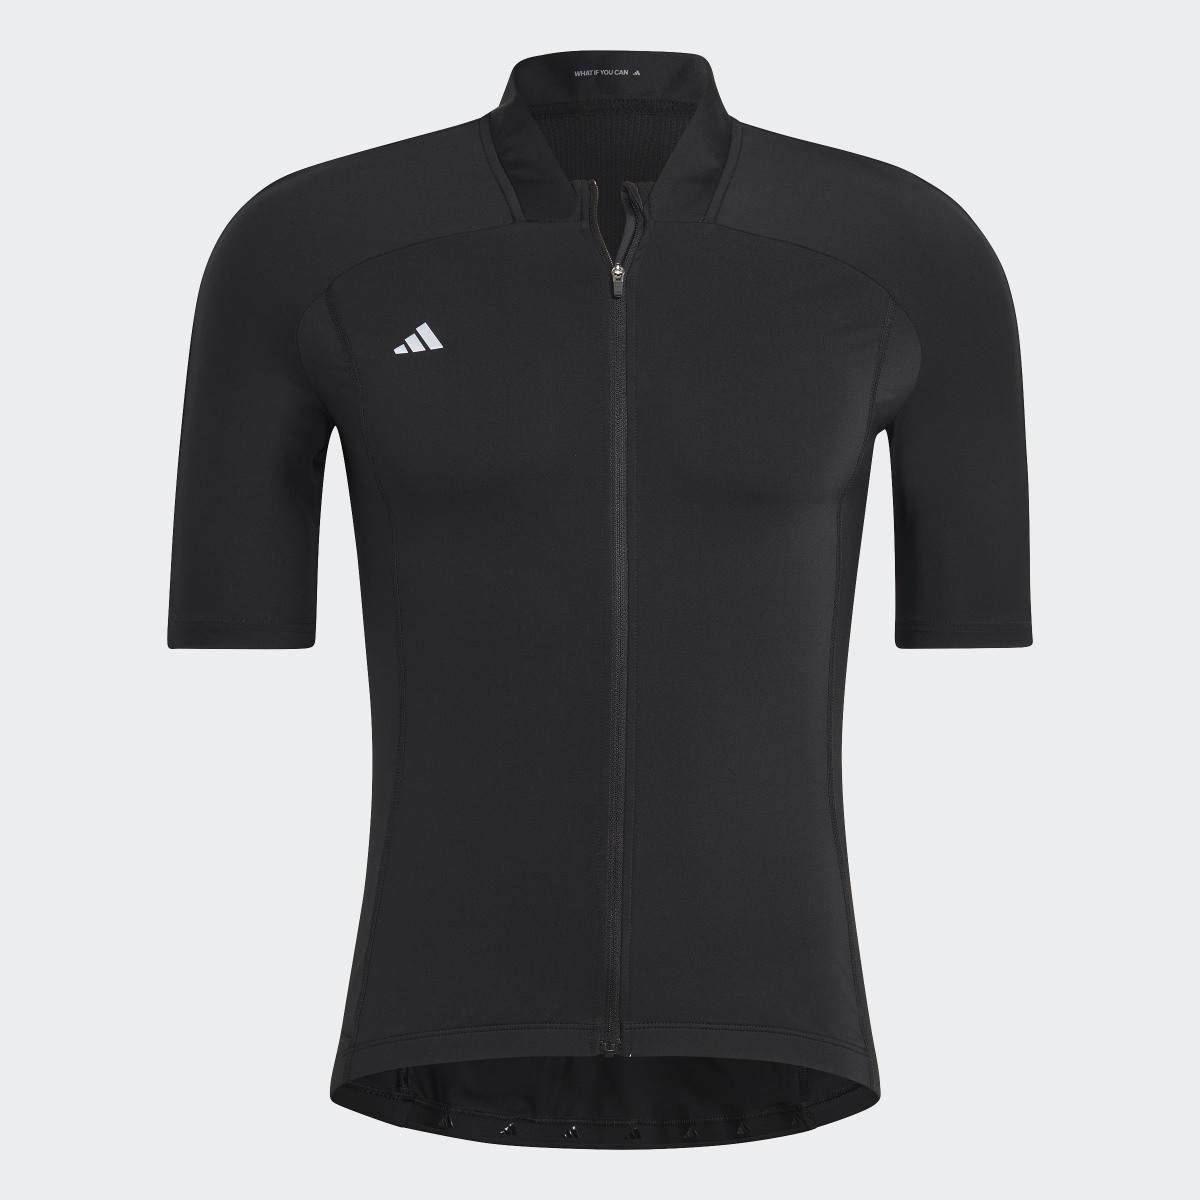 Adidas The Cycling Jersey. 5